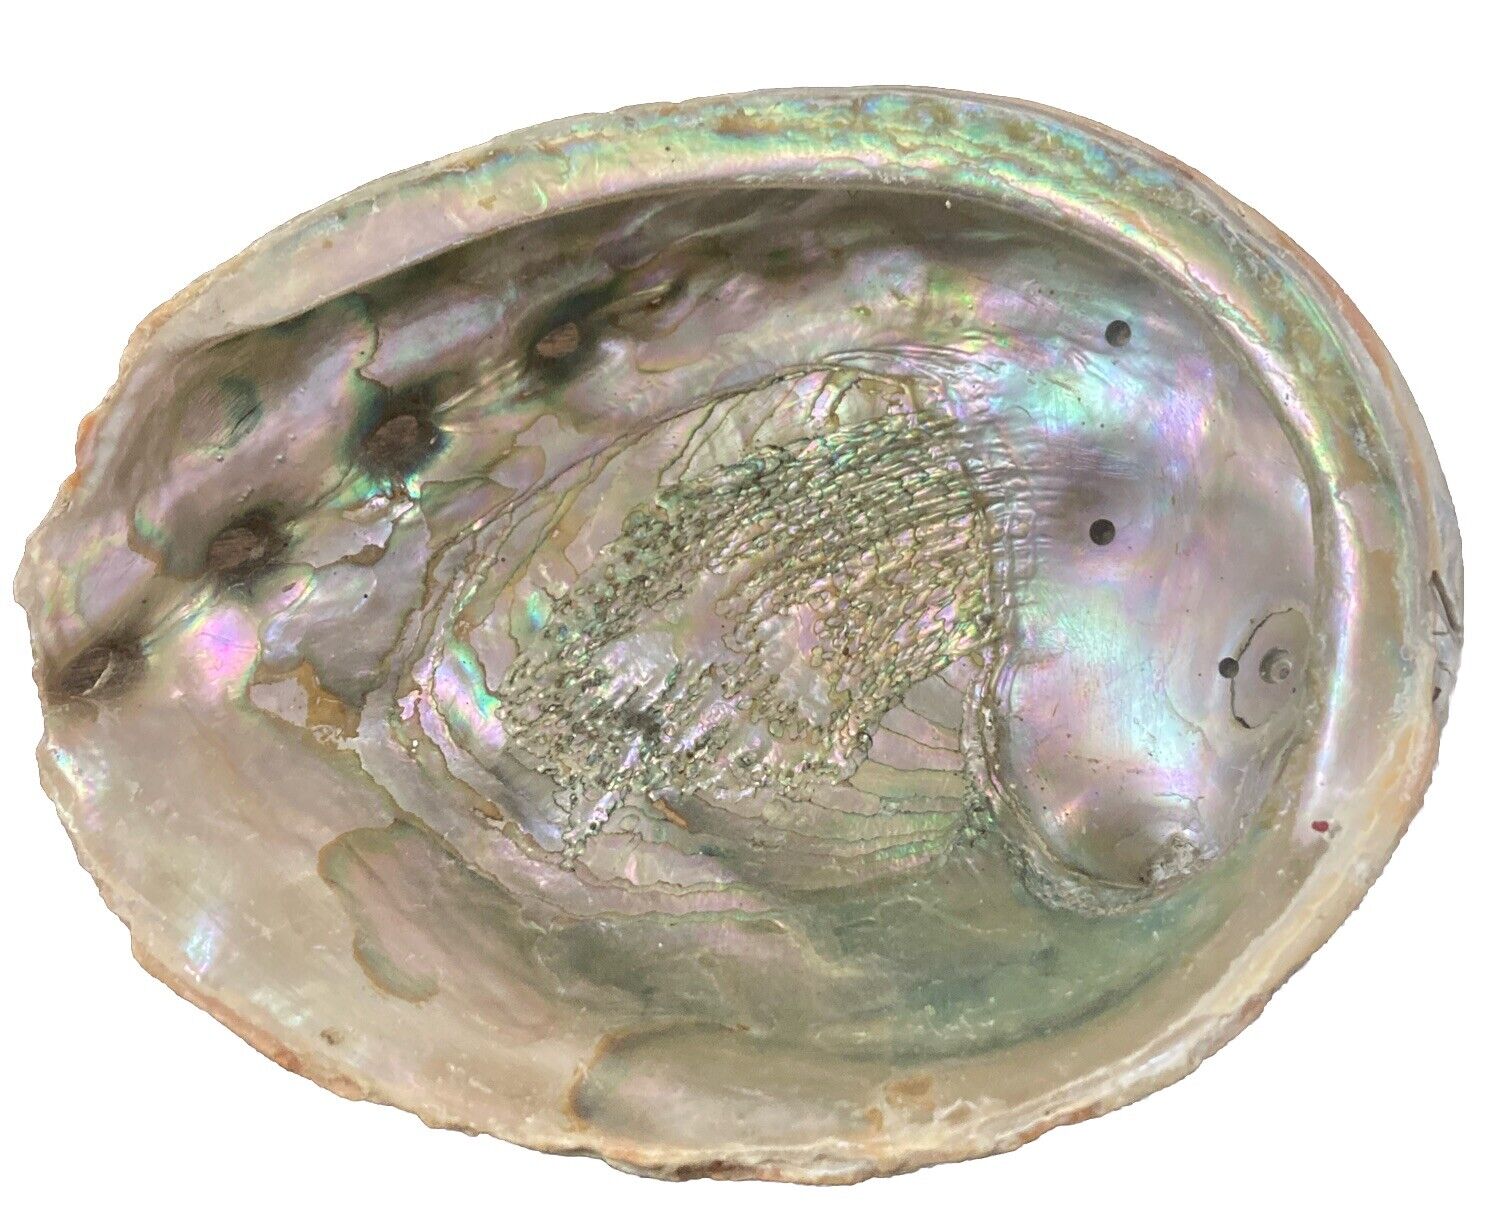 Large Vintage RED Abalone Shell for Crafts Jewlery Art Beach Decor 8”x6.5” #9